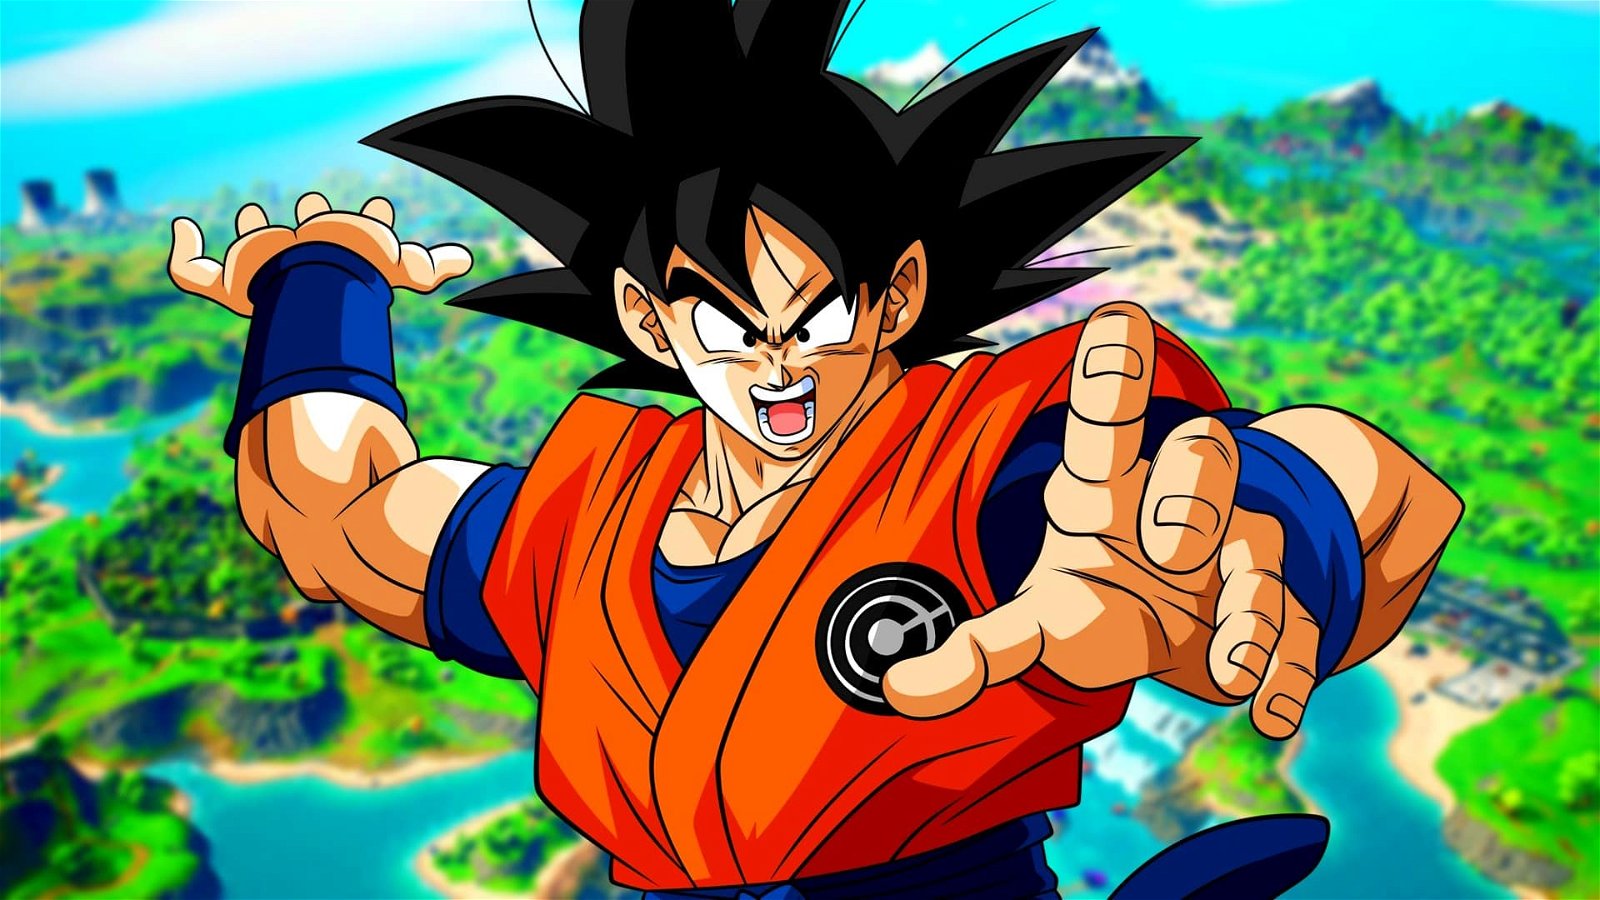 Dragon Ball's New Online Multiplayer Game Gets An Overview Trailer